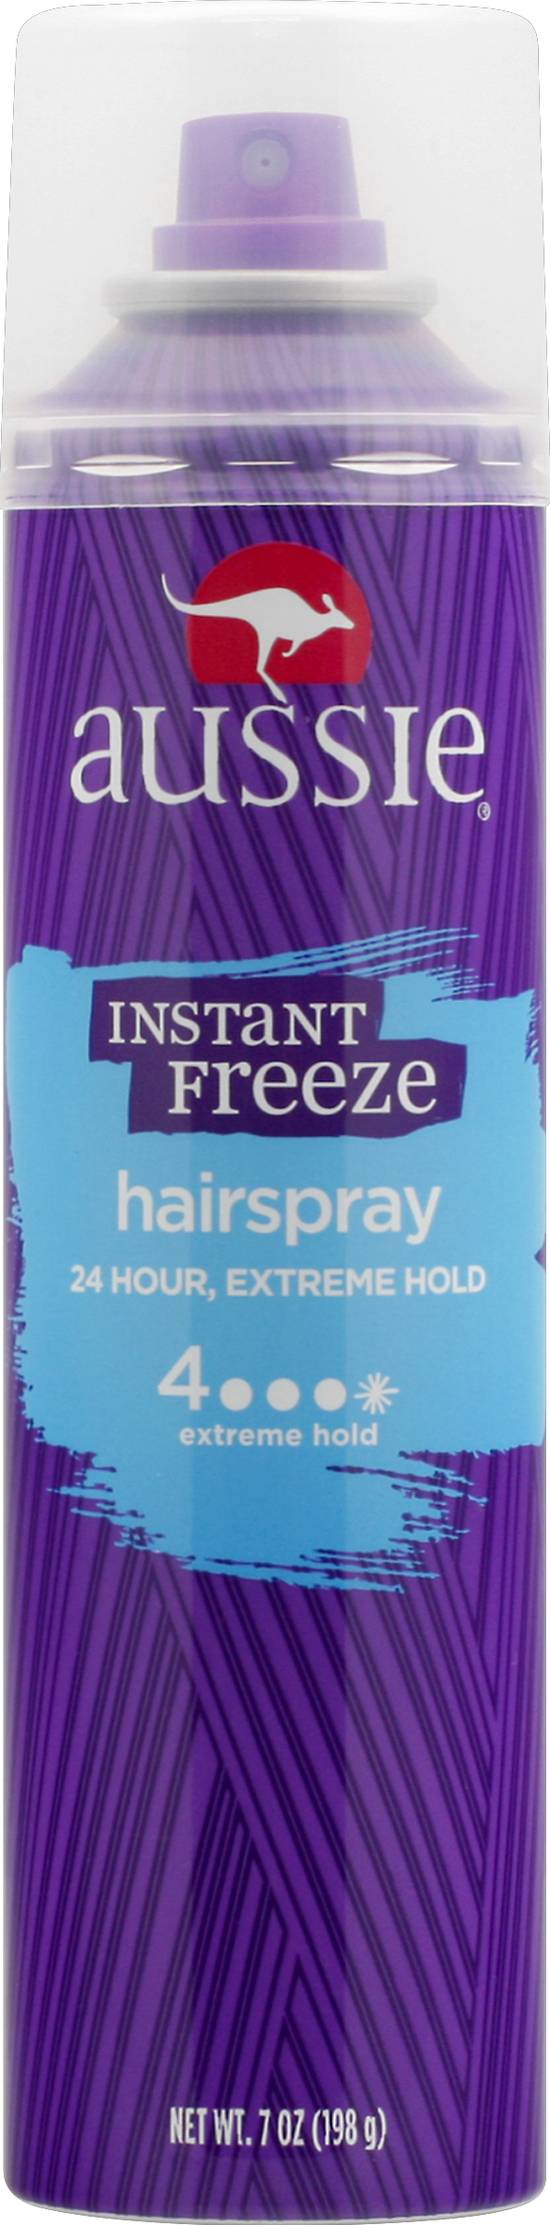 Aussie Instant Freeze Hairspray 24 Hour Extreme Hold (7 oz), Delivery Near  You